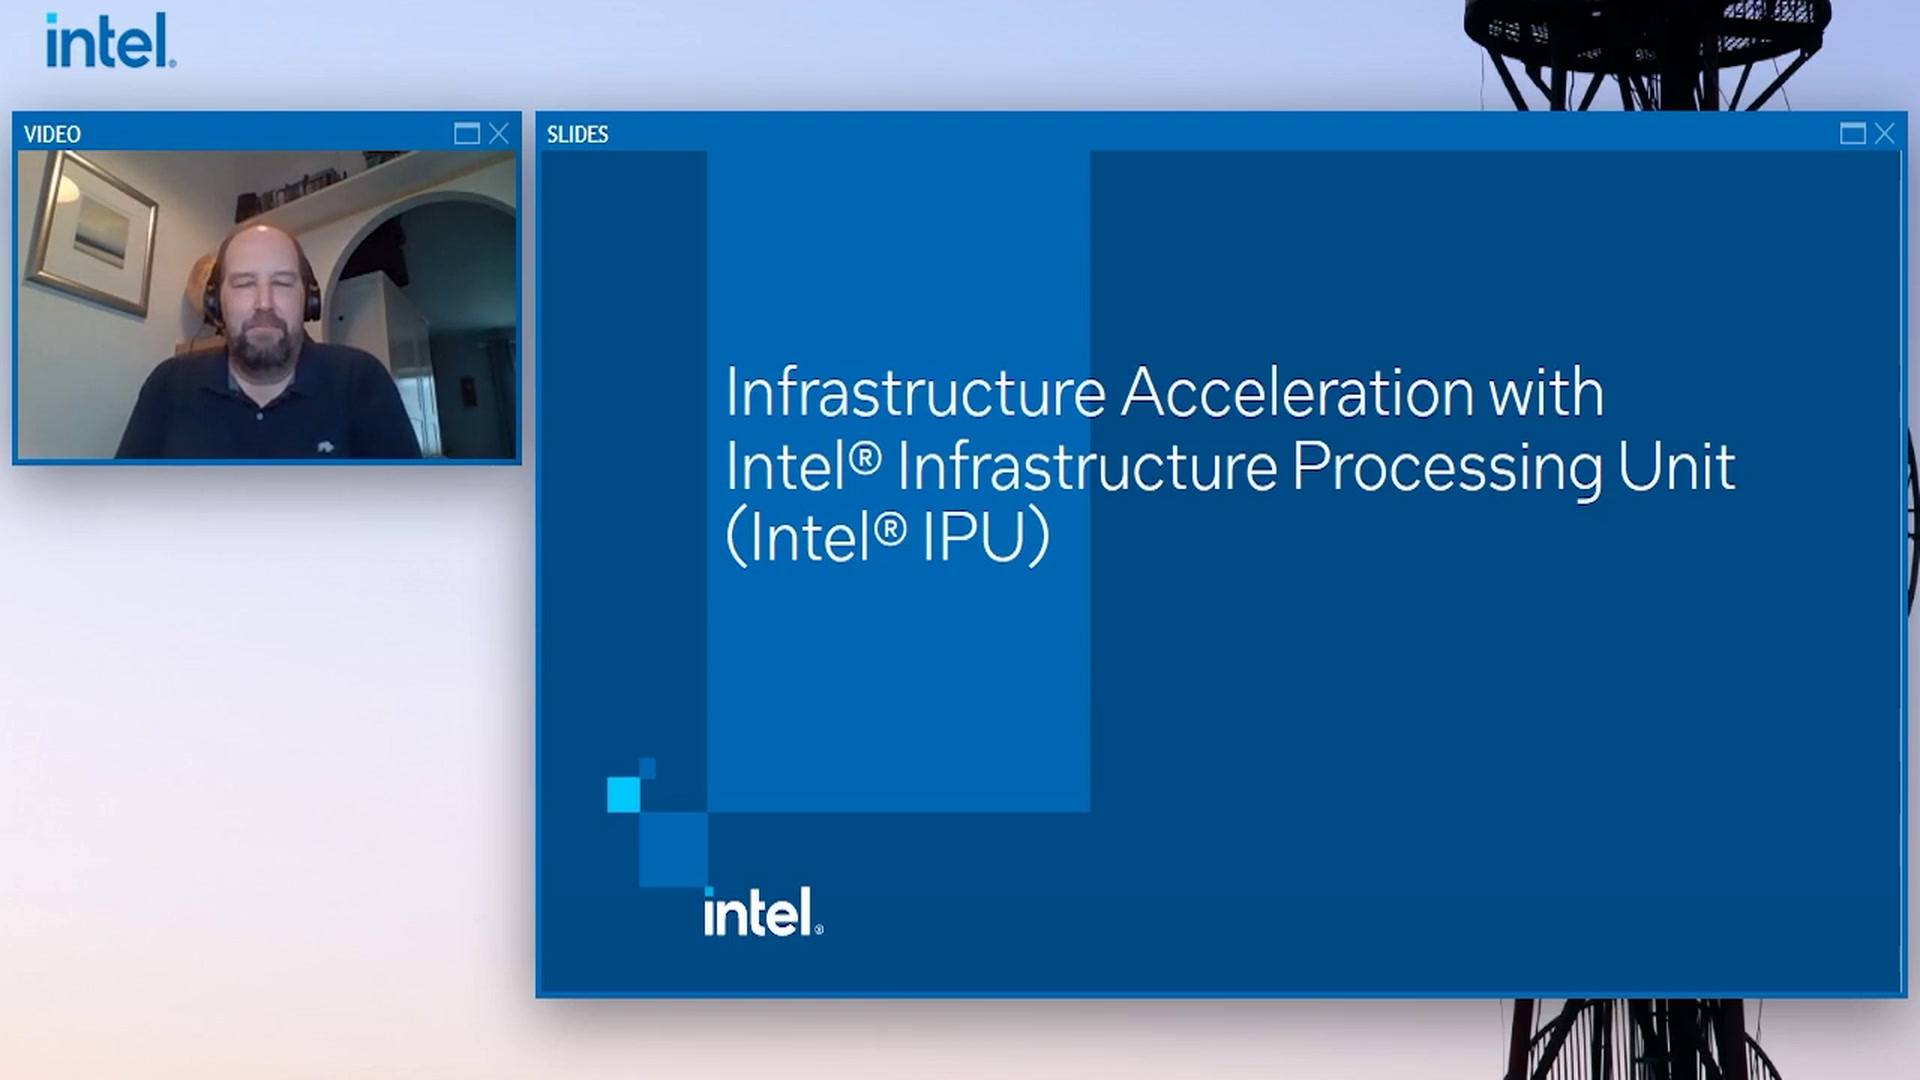 Infrastructure Acceleration with Intel® Infrastructure Processing Unit (Intel® IPU)